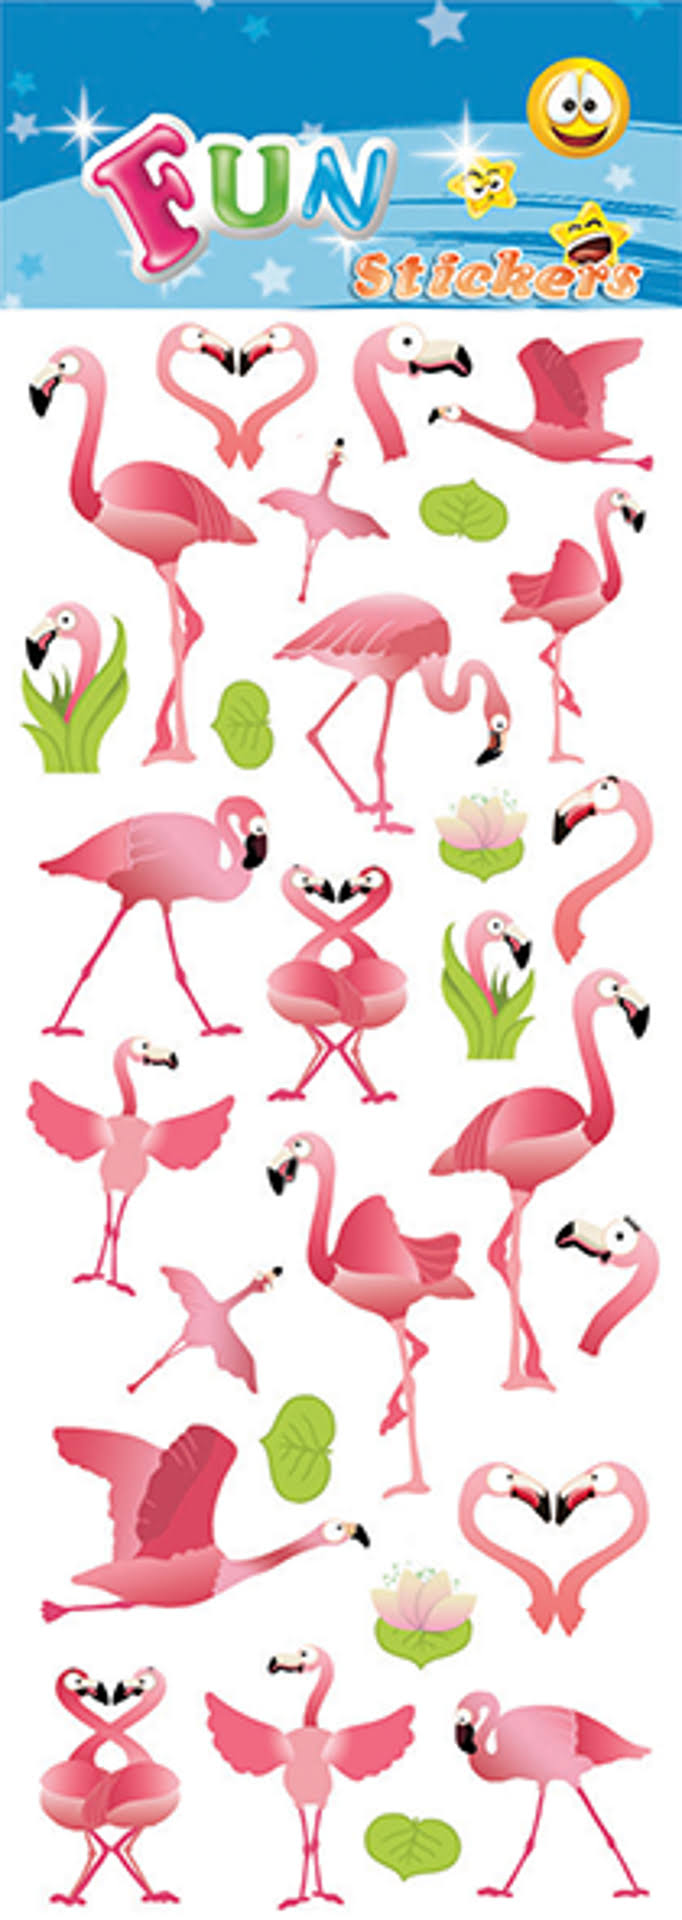 Fun Stickers PINK FLAMINGOS For Children Fun Activities Craft Decorating Gifts